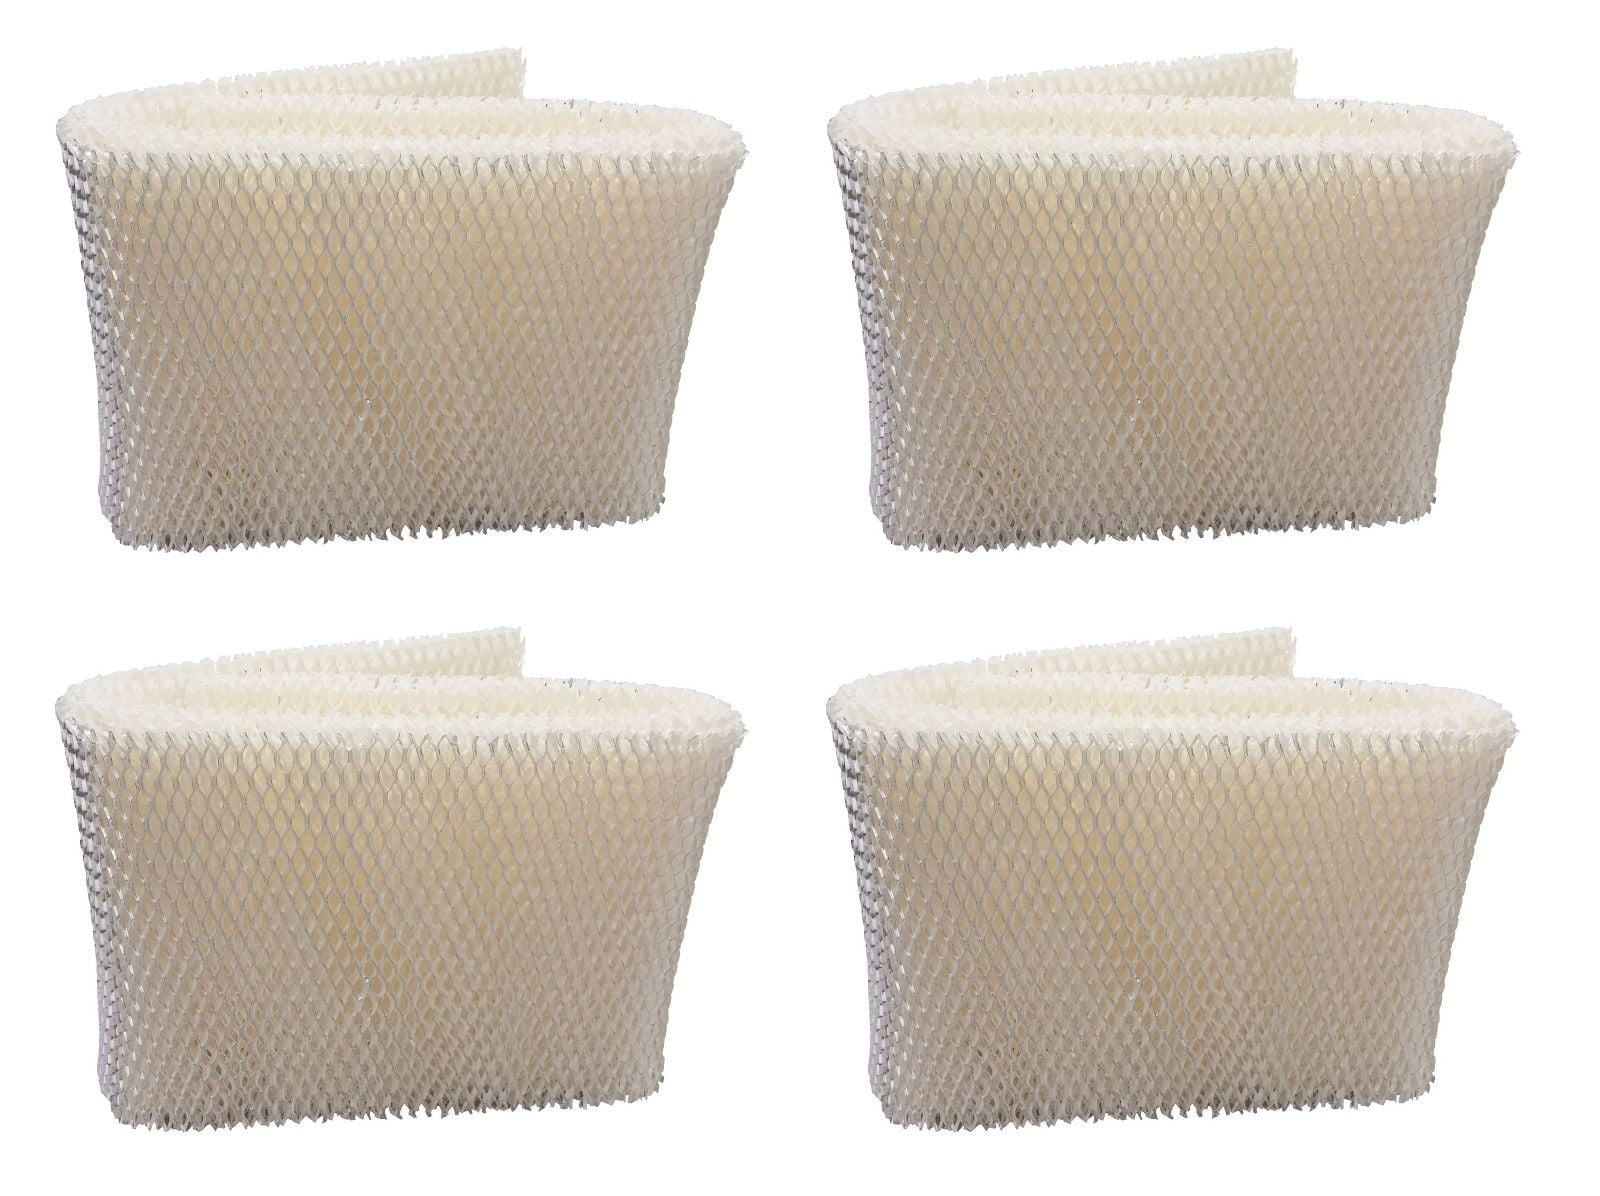 12 Humidifier Wick Filter for Essick Air MAF-1 MAF1 MoistAir AirCare 